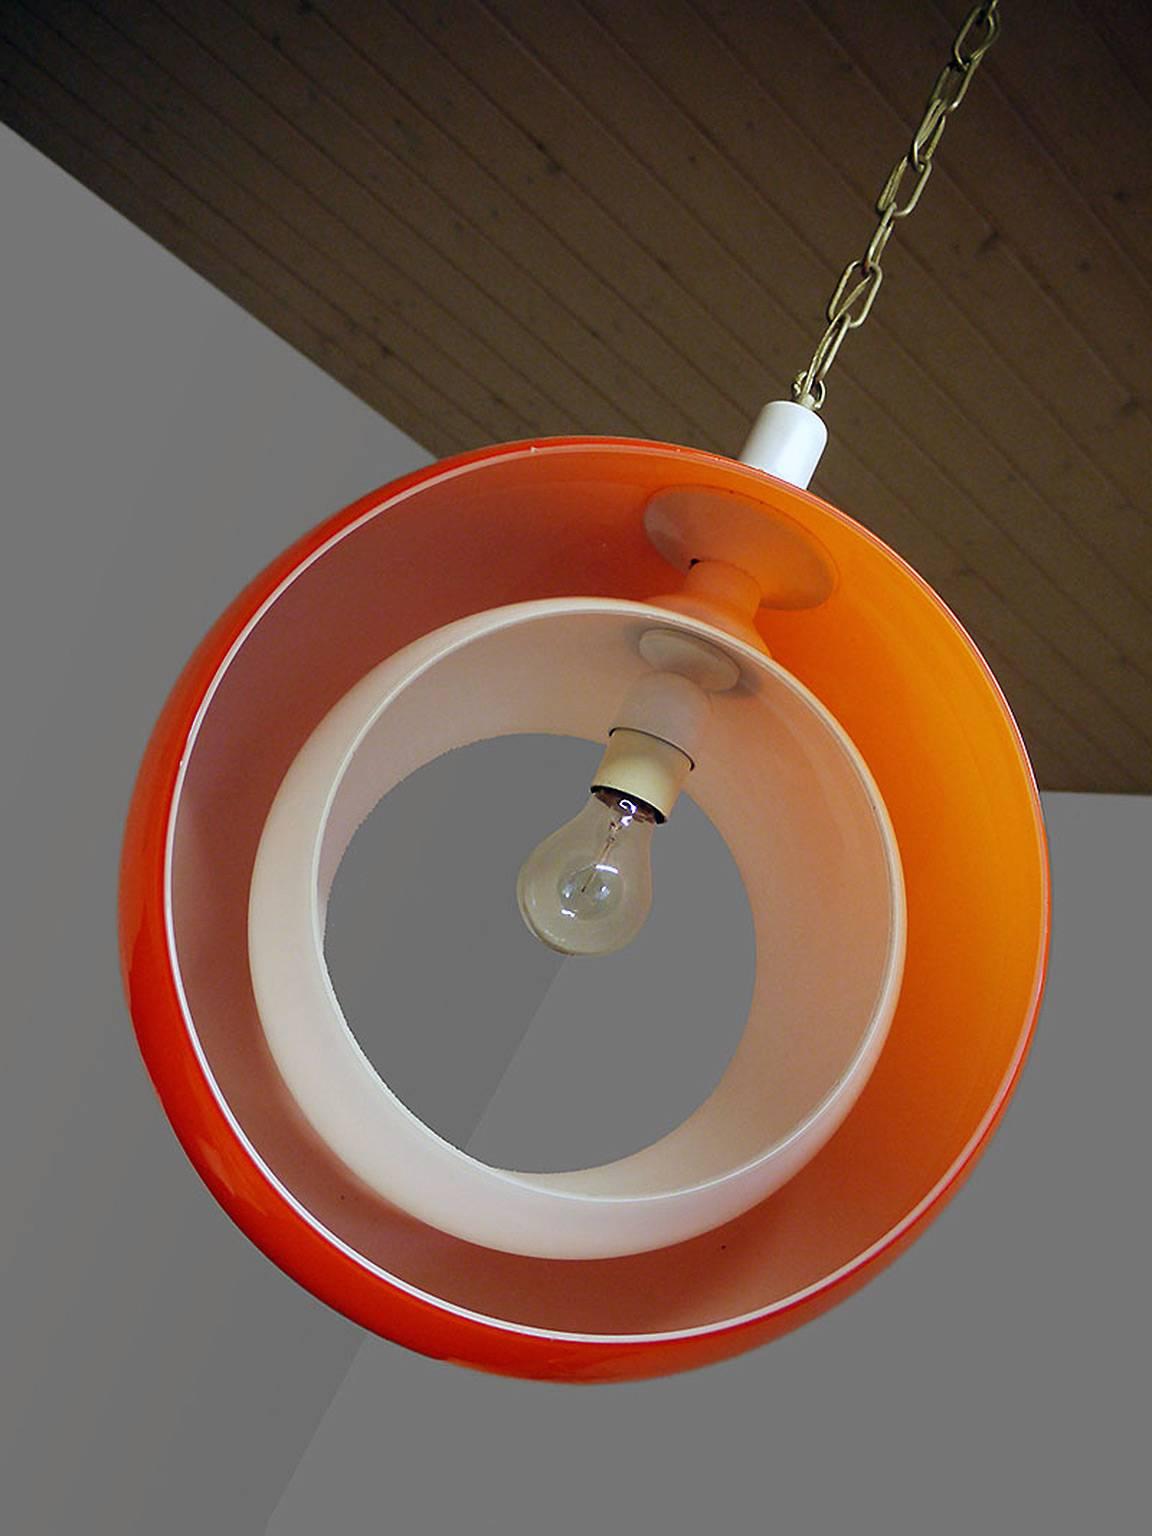 Murano glass pendant lamp by Carlo Nason for Mazzega, Italy with an orange glass globe and a white opaline glass moving part. Designed in the 1960s, Italy.
The lamp takes one large Edison bulb.
Measures: Diameter 15 in./ 38 cm
Height 17.7 in. /